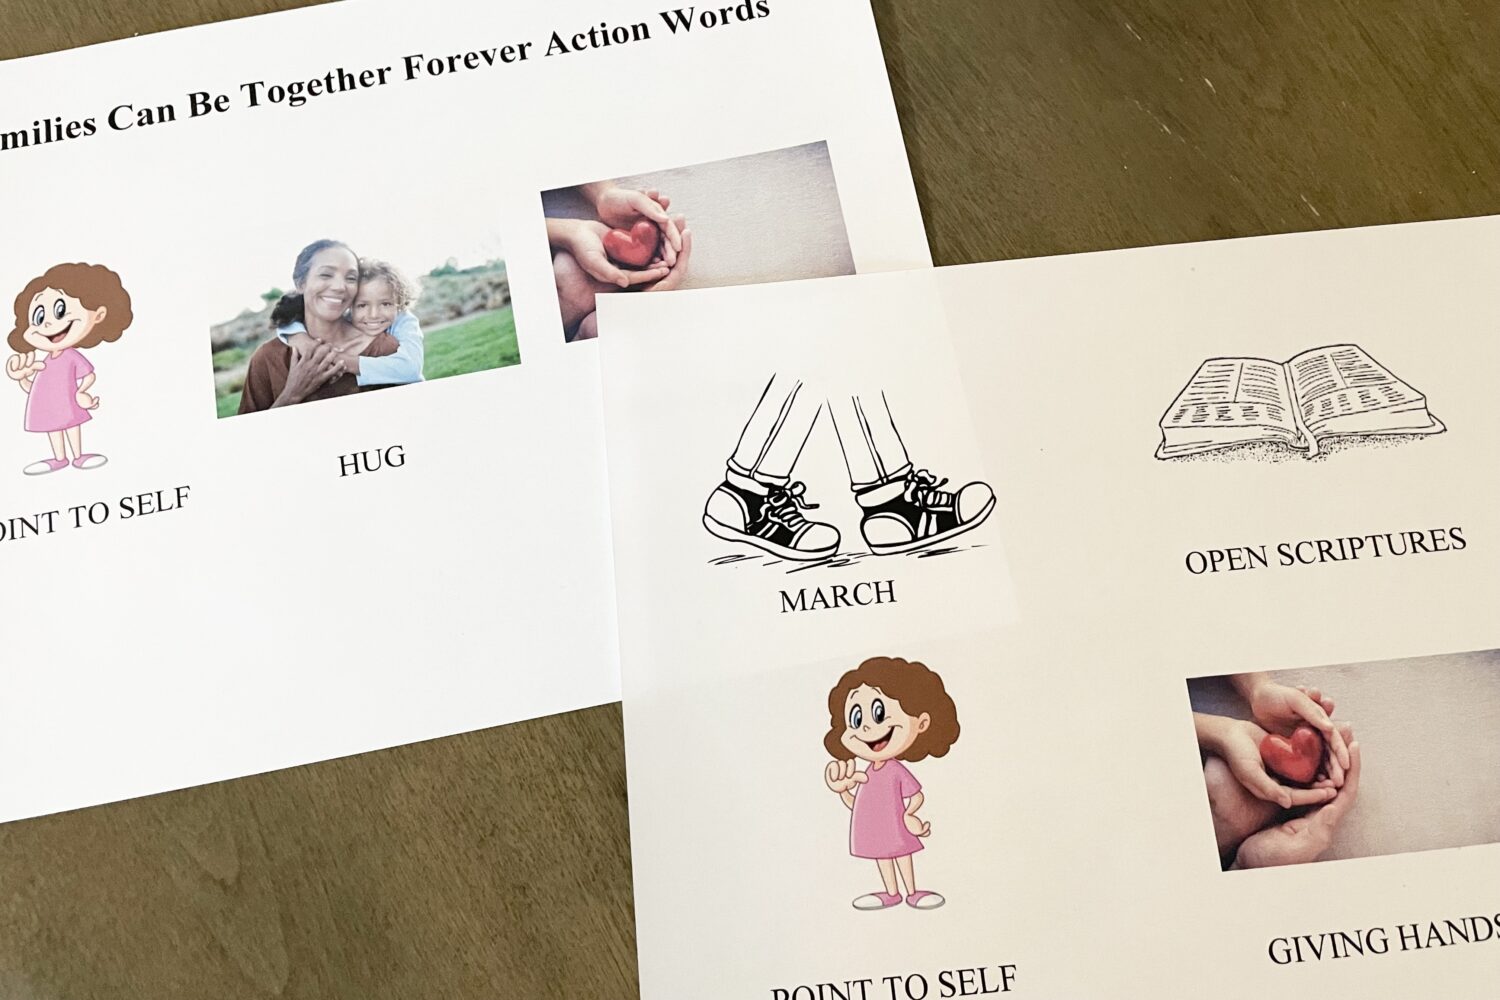 Families Can Be Together Forever Action Words singing time idea for LDS Primary Music Leaders. Fun and easy way to teach Families Can Be Together Forever in Primary.